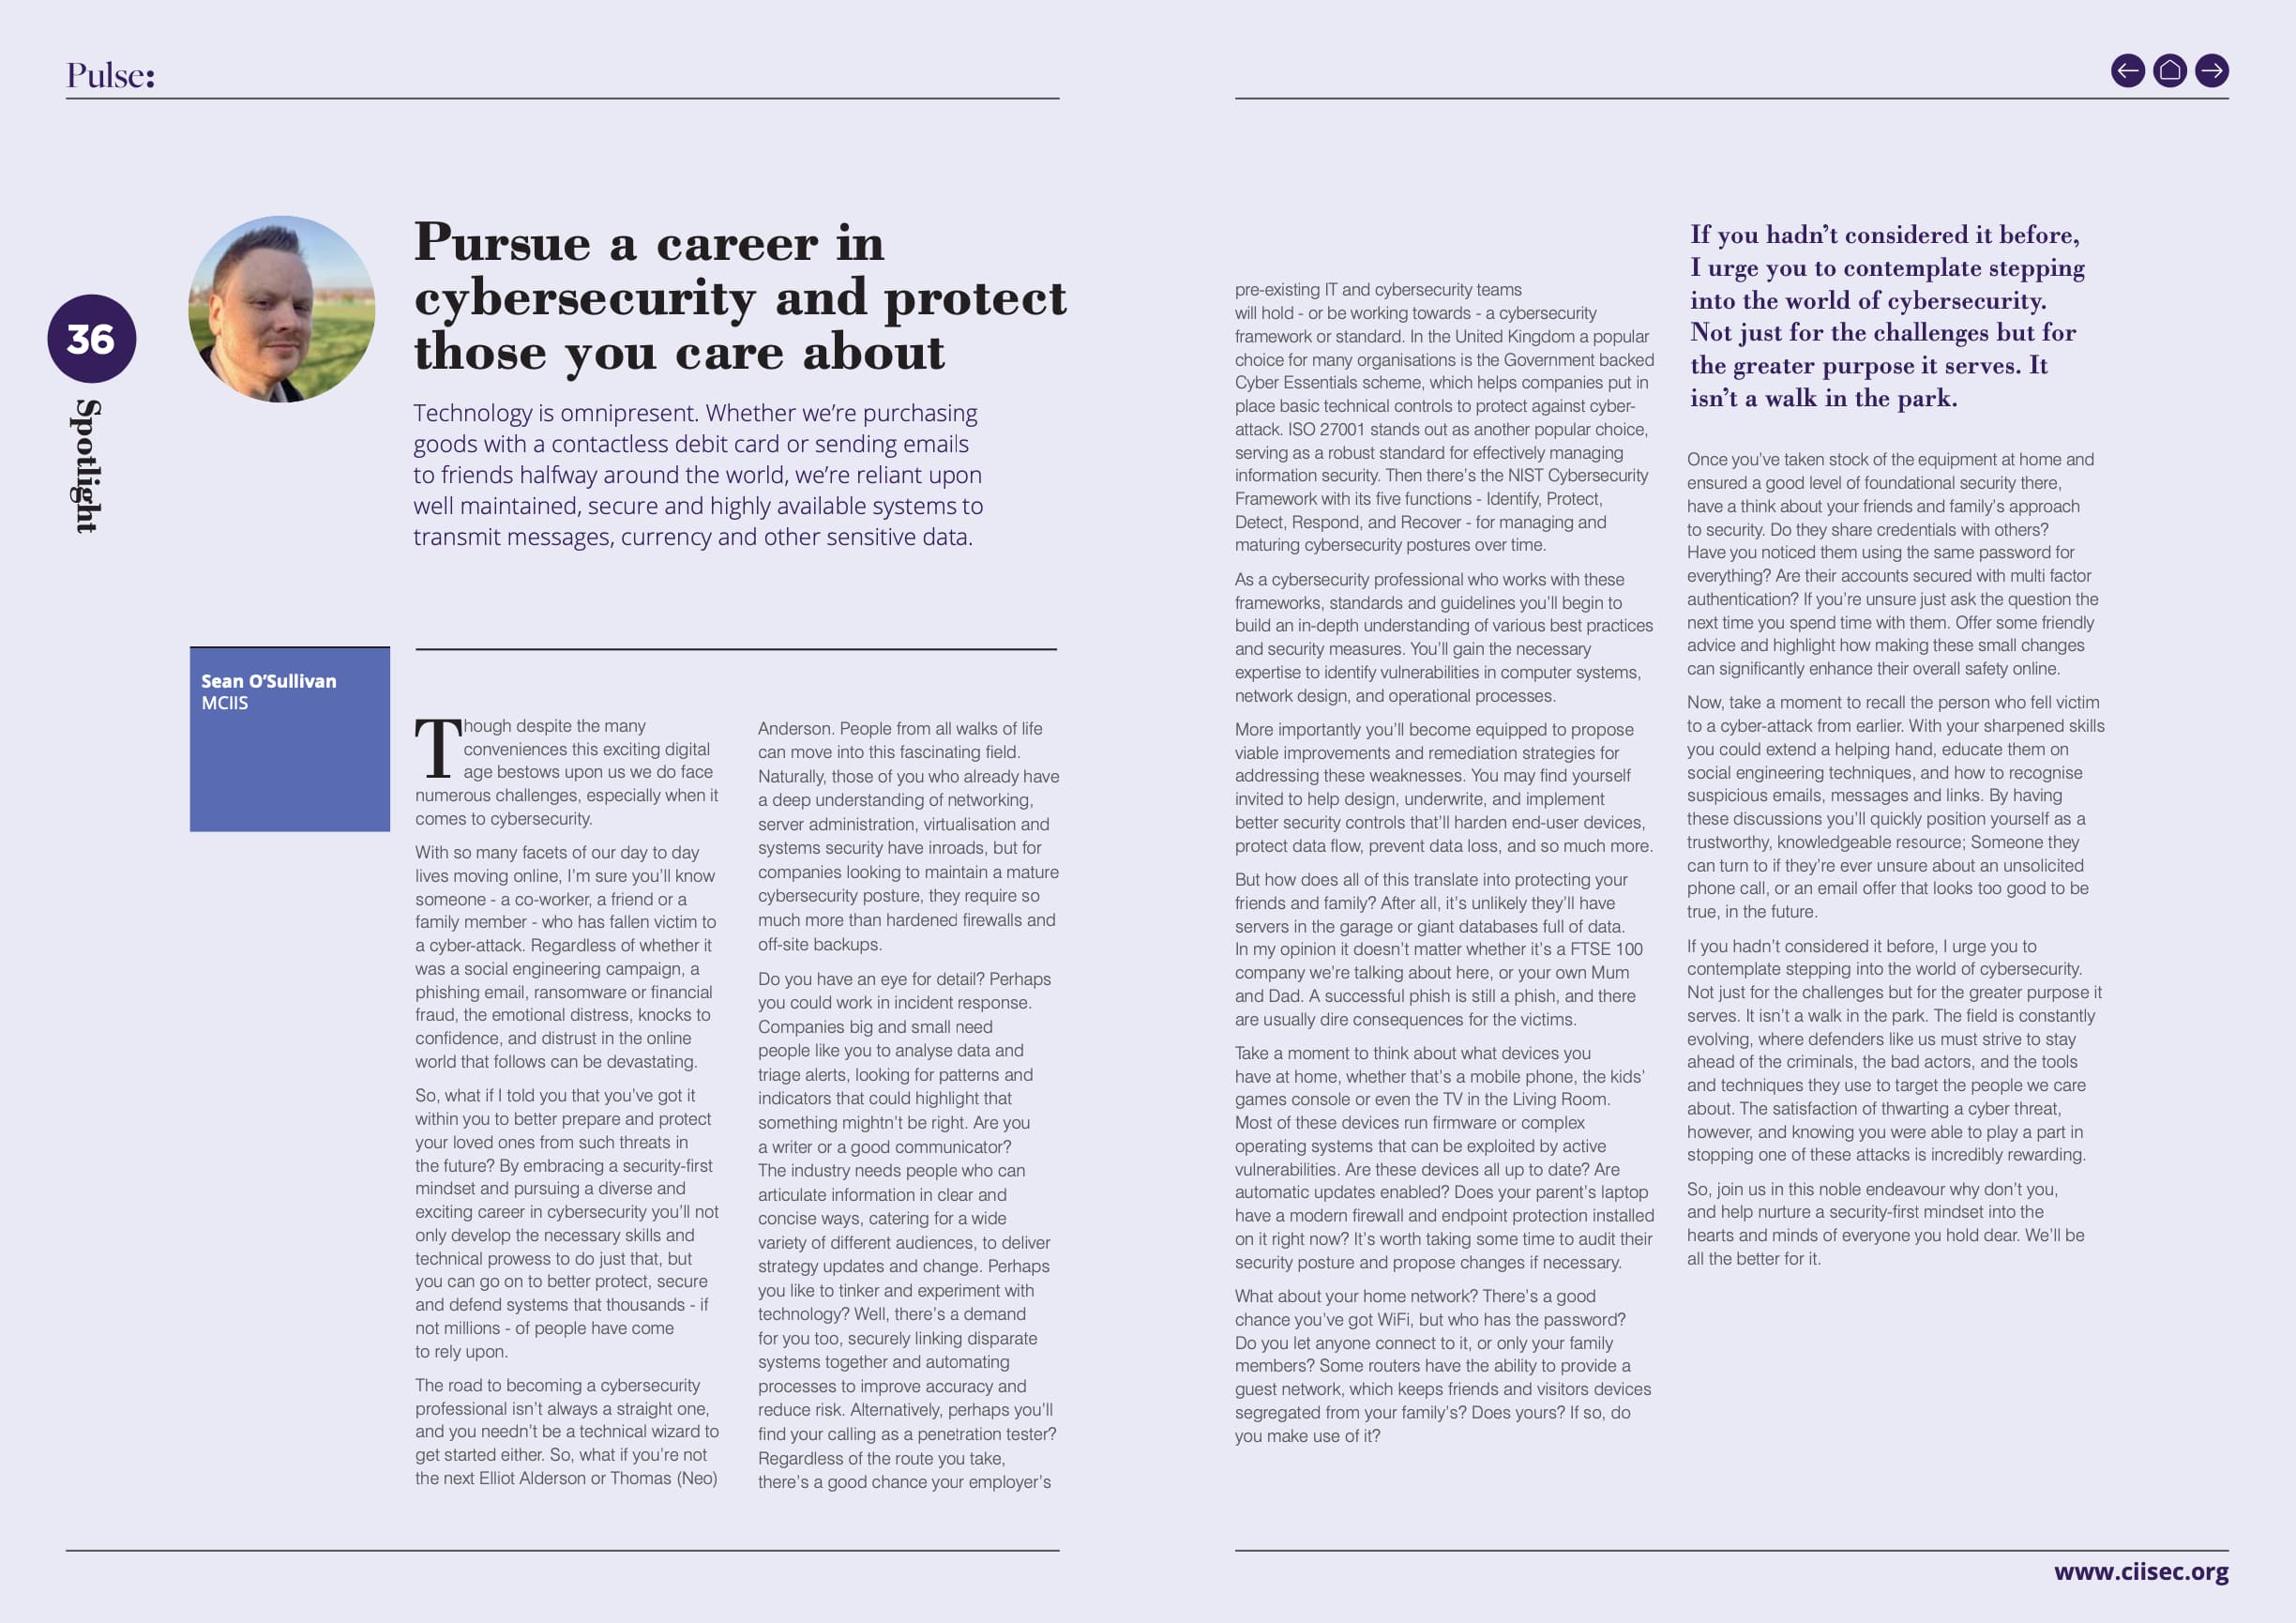 The two page spread of my editorial in CIISEC Pulse magazine